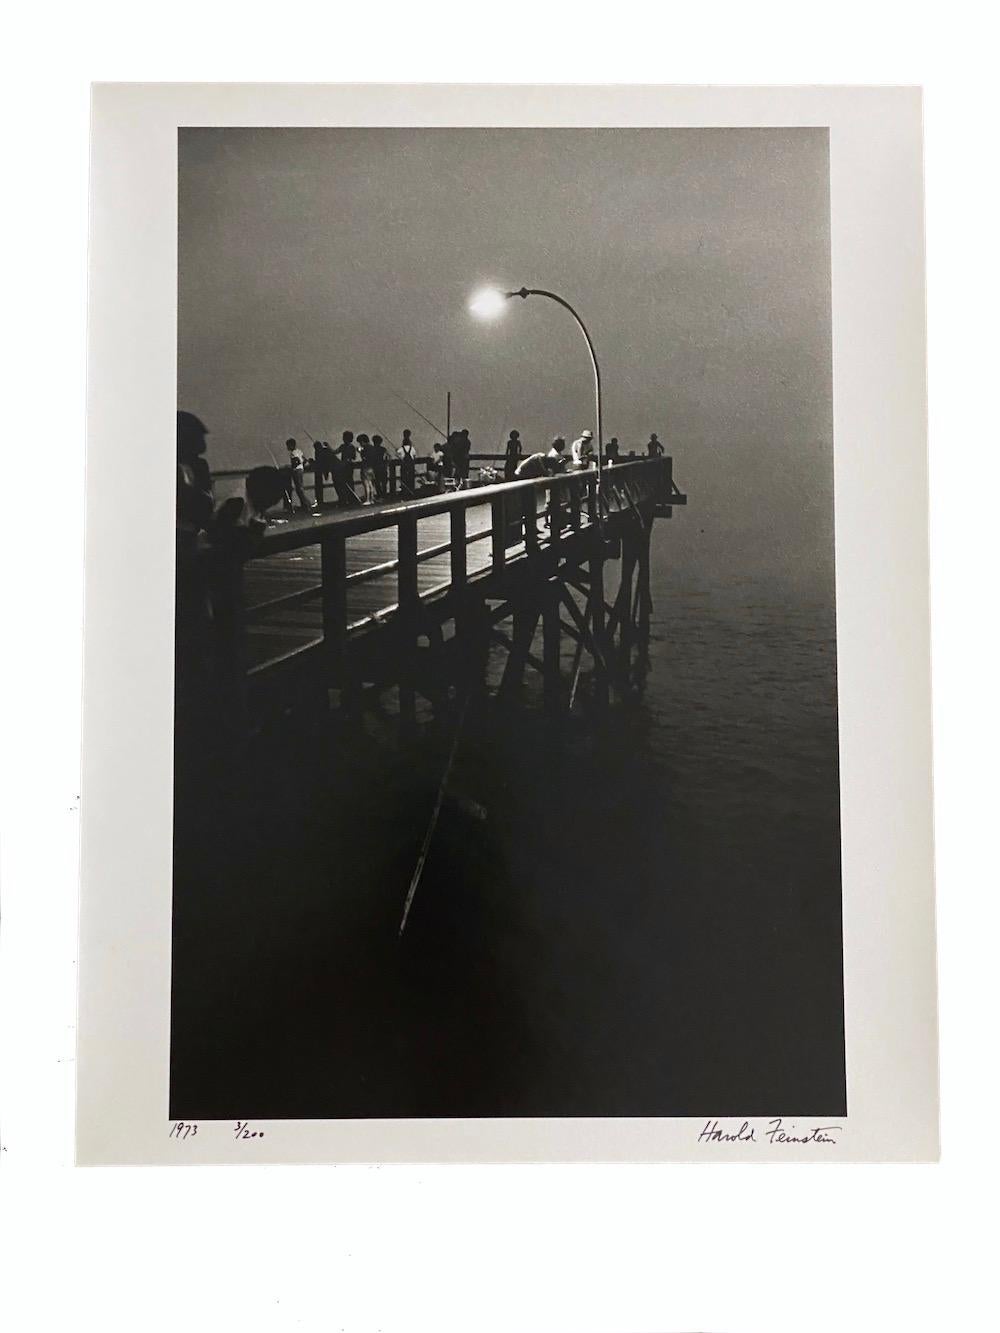 Night Fishing from Pier, Coney Island - Photograph by Harold Feinstein